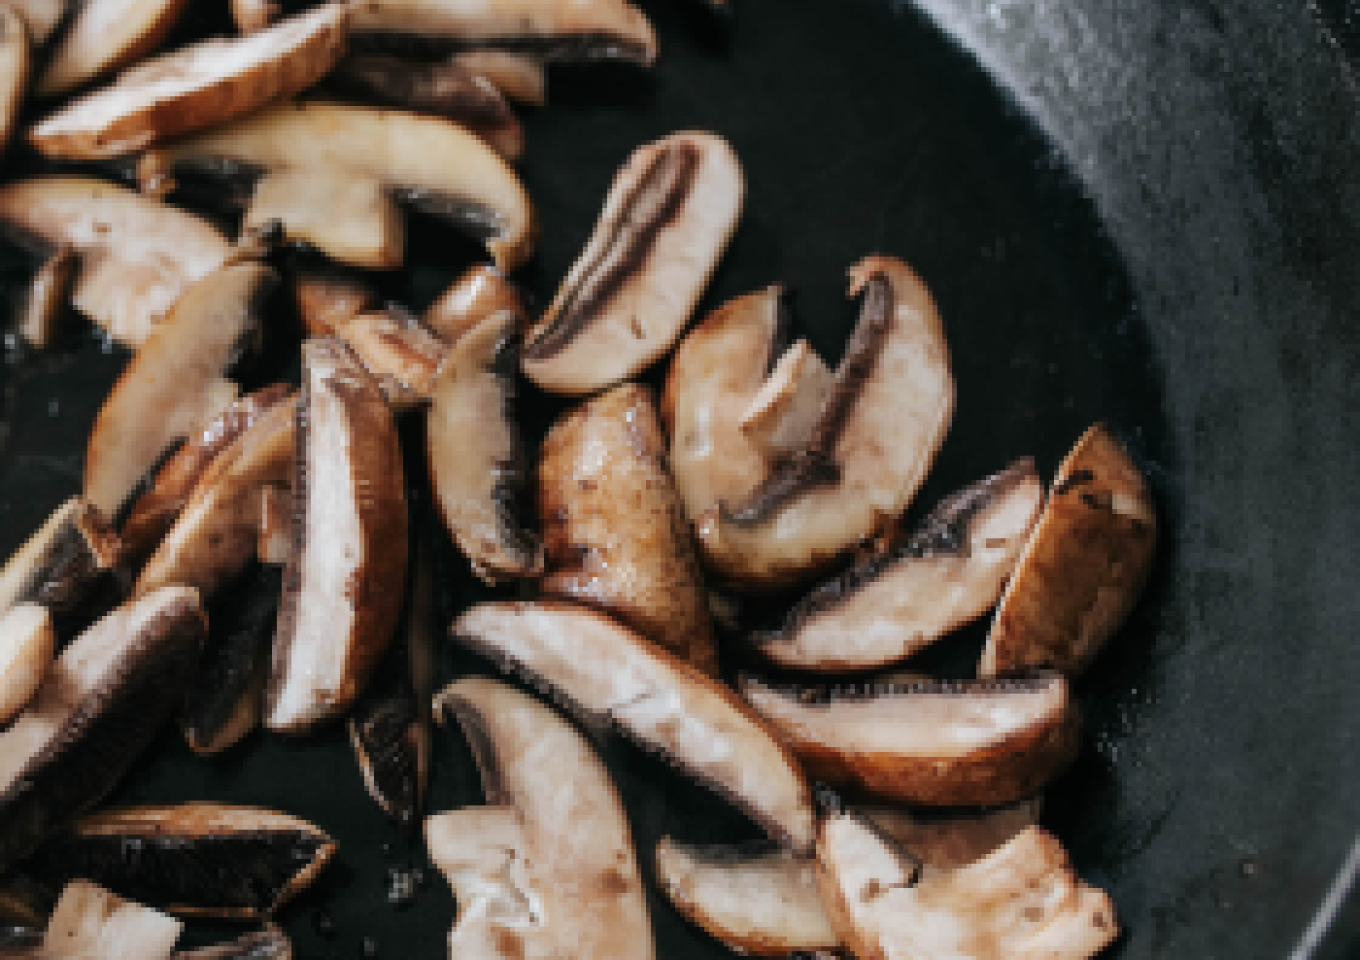 The simplest way to sauté